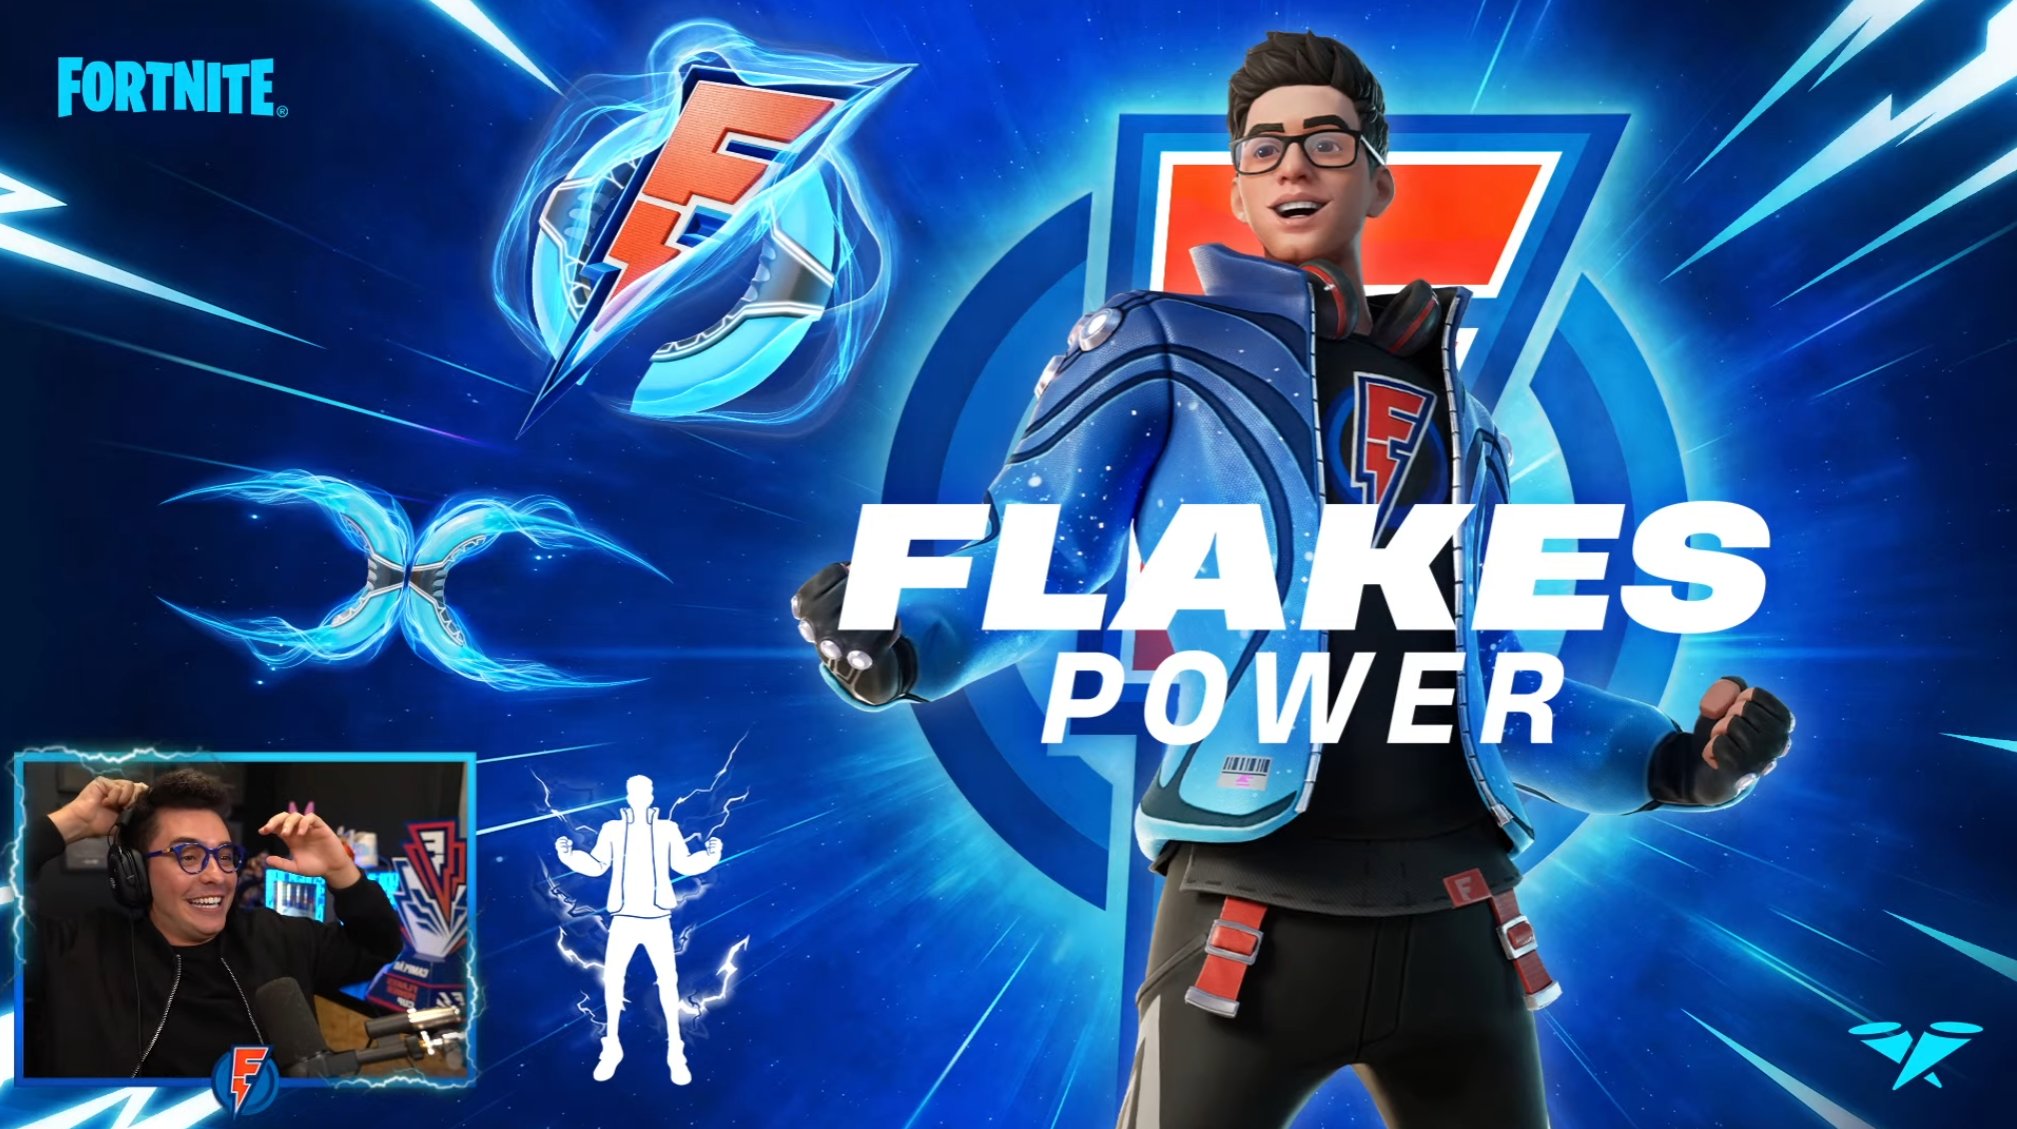 Fortnite x Flakes Power Skin: Flakes Power is now part of the Fortnite ICON Series! CHECK NEW SKINS